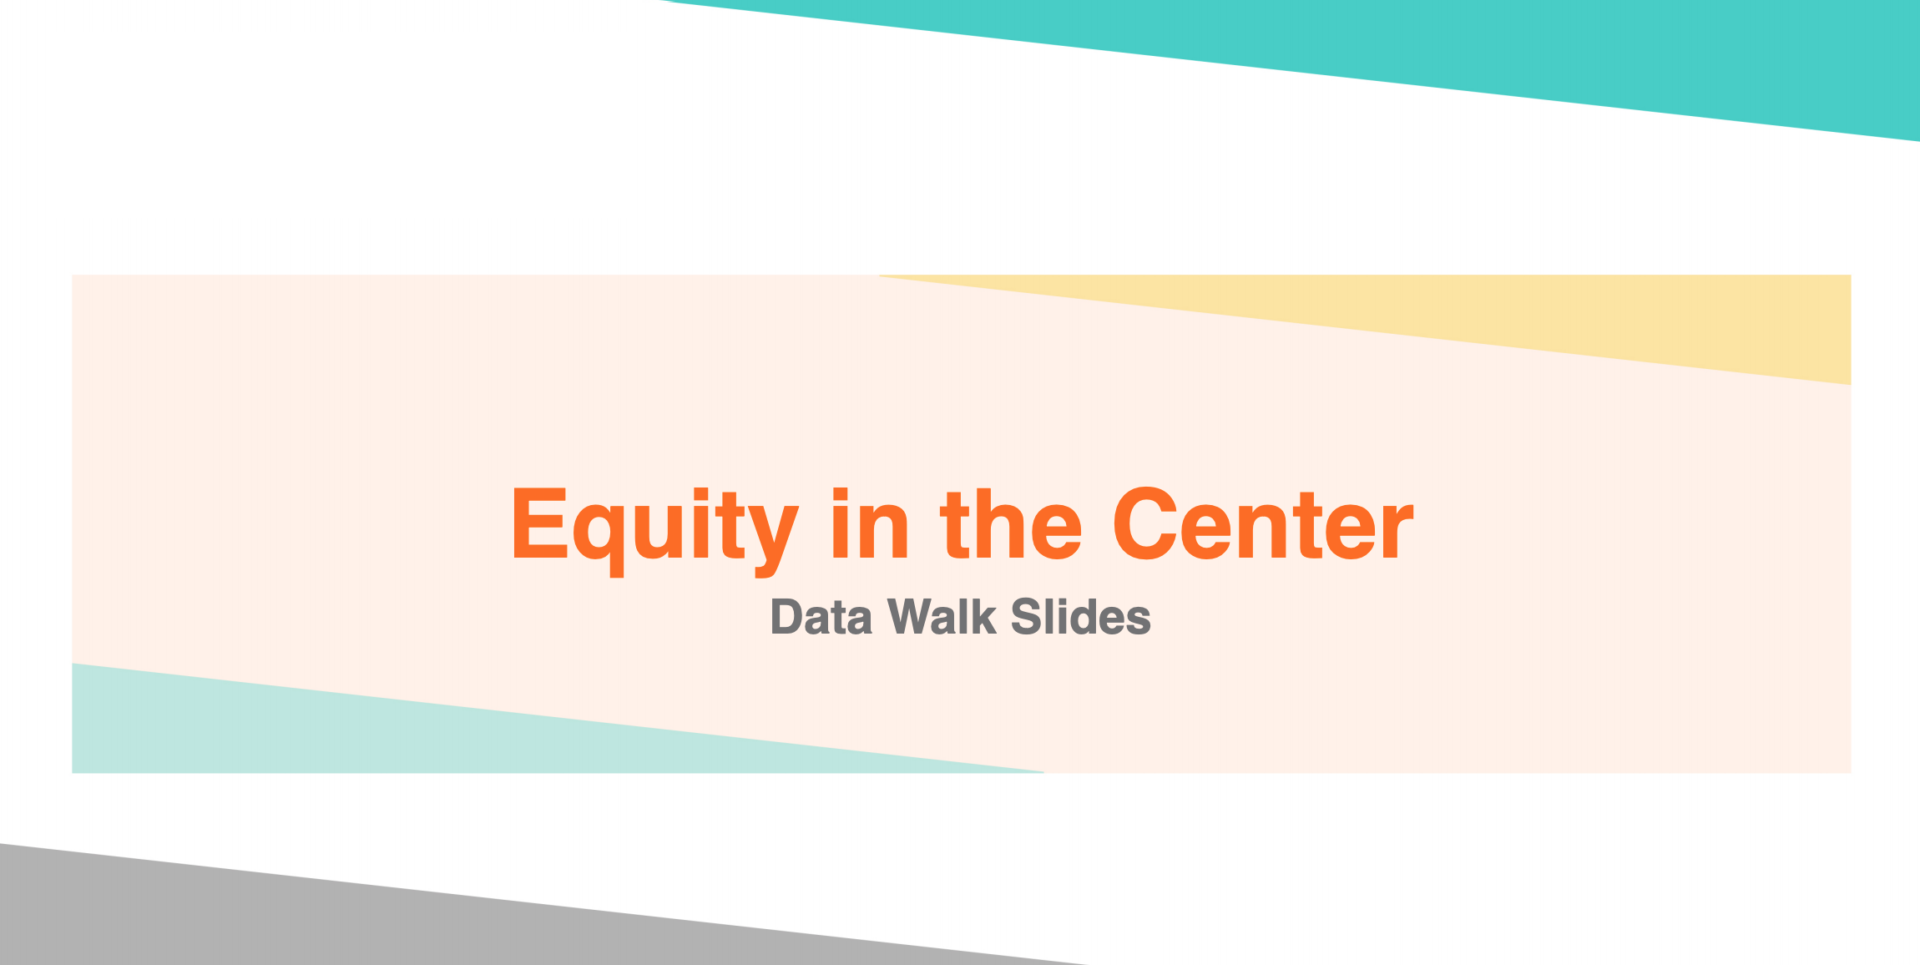 Data and statistics on the racial leadership gap in the Social Sector.